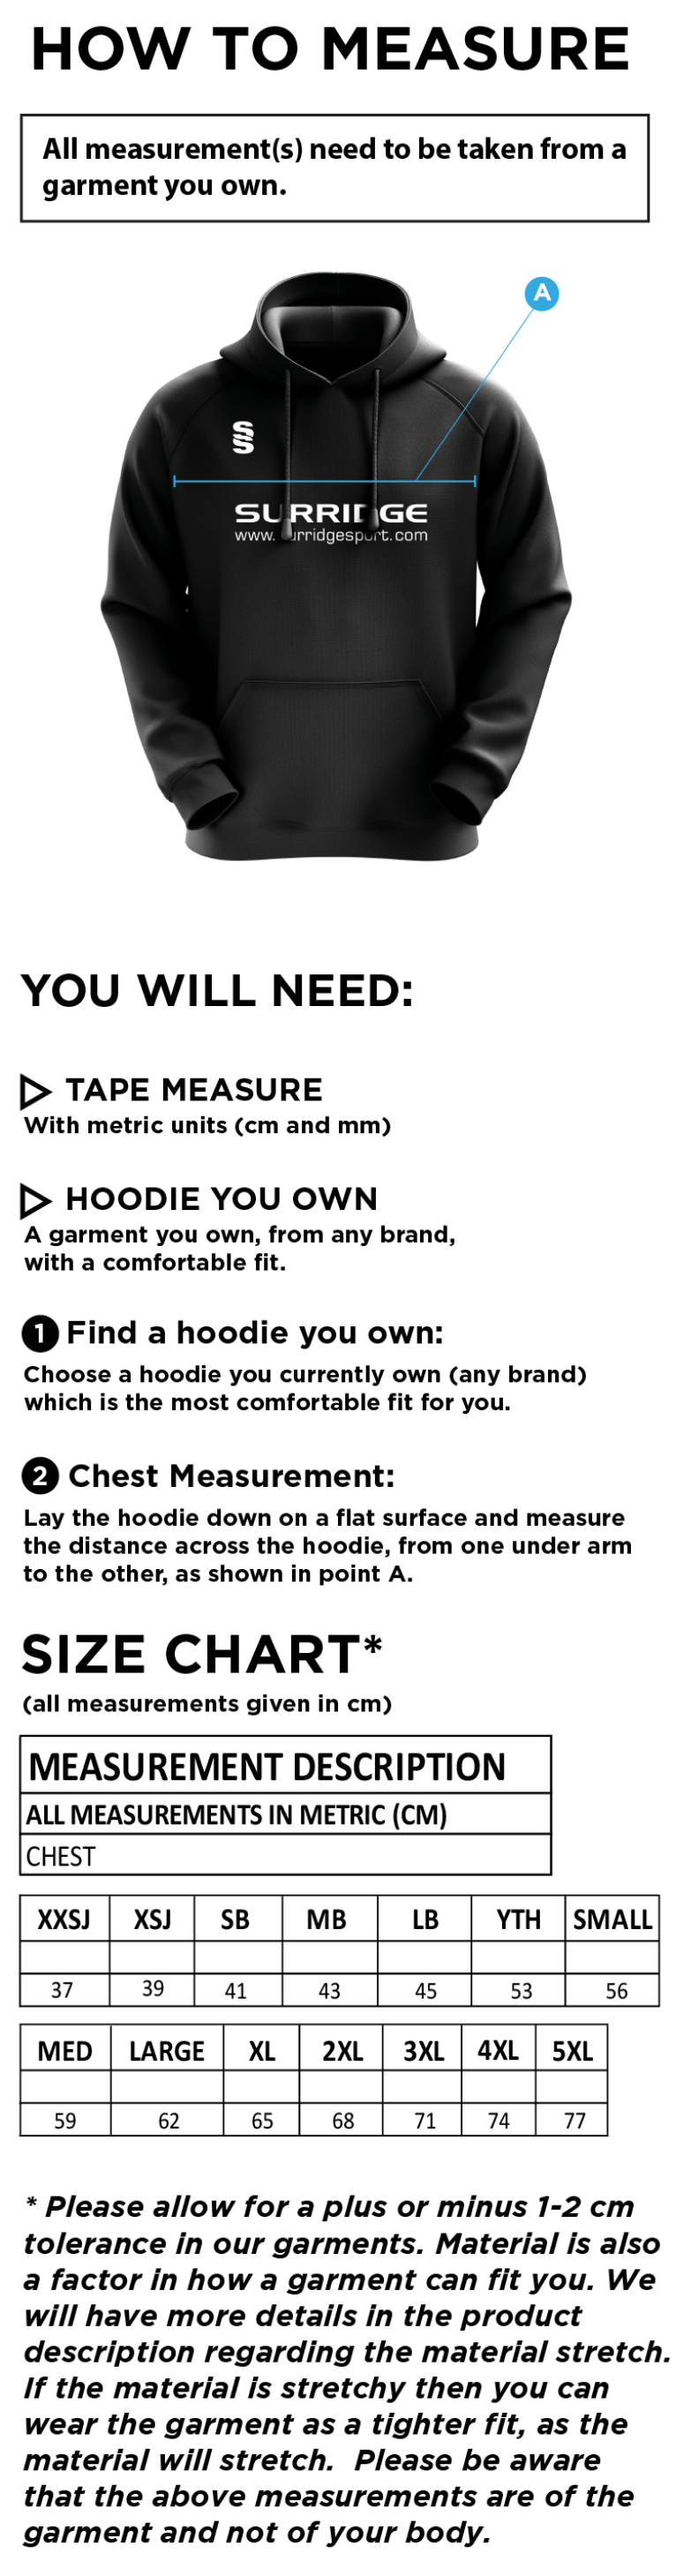 Porchfield CC - Fuse Hoody - Size Guide